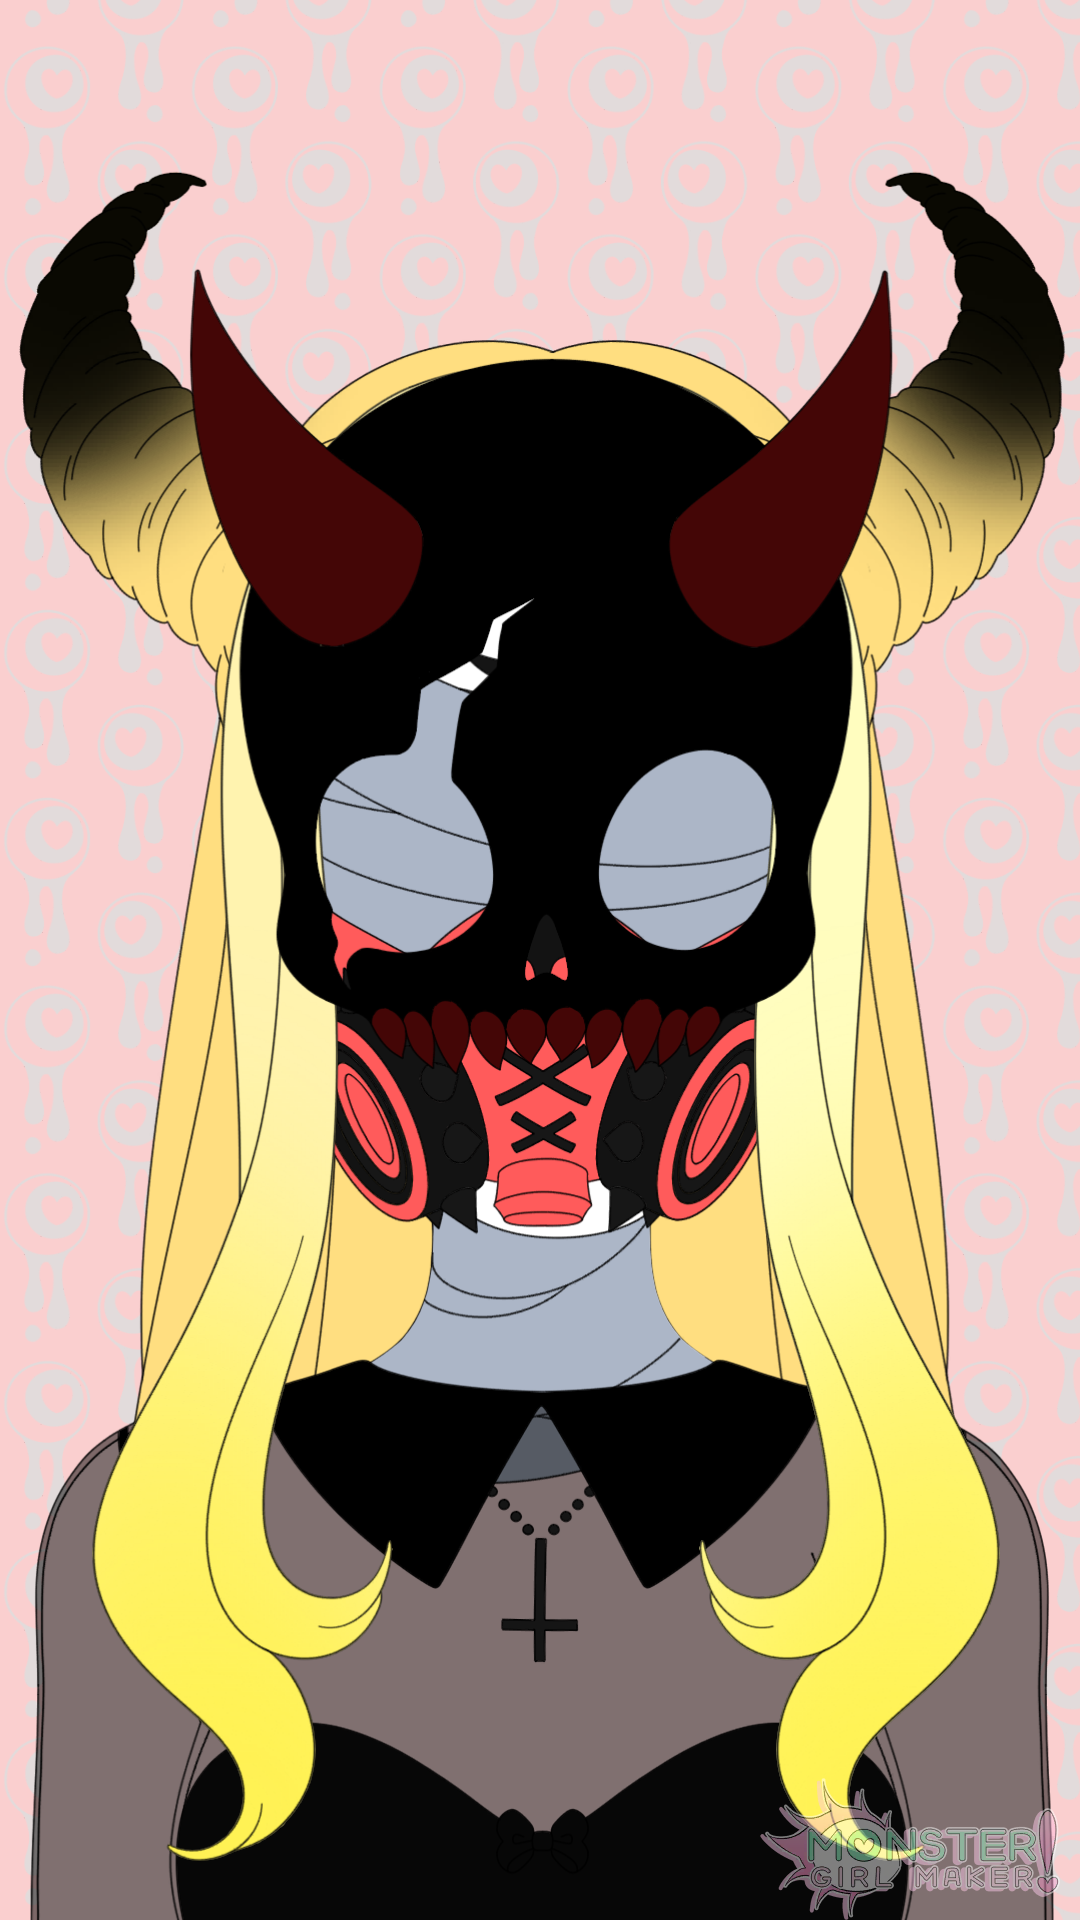 Comments 5574 to 5535 of 24029 - Monster Girl Maker by Emmy- GhoulKiss